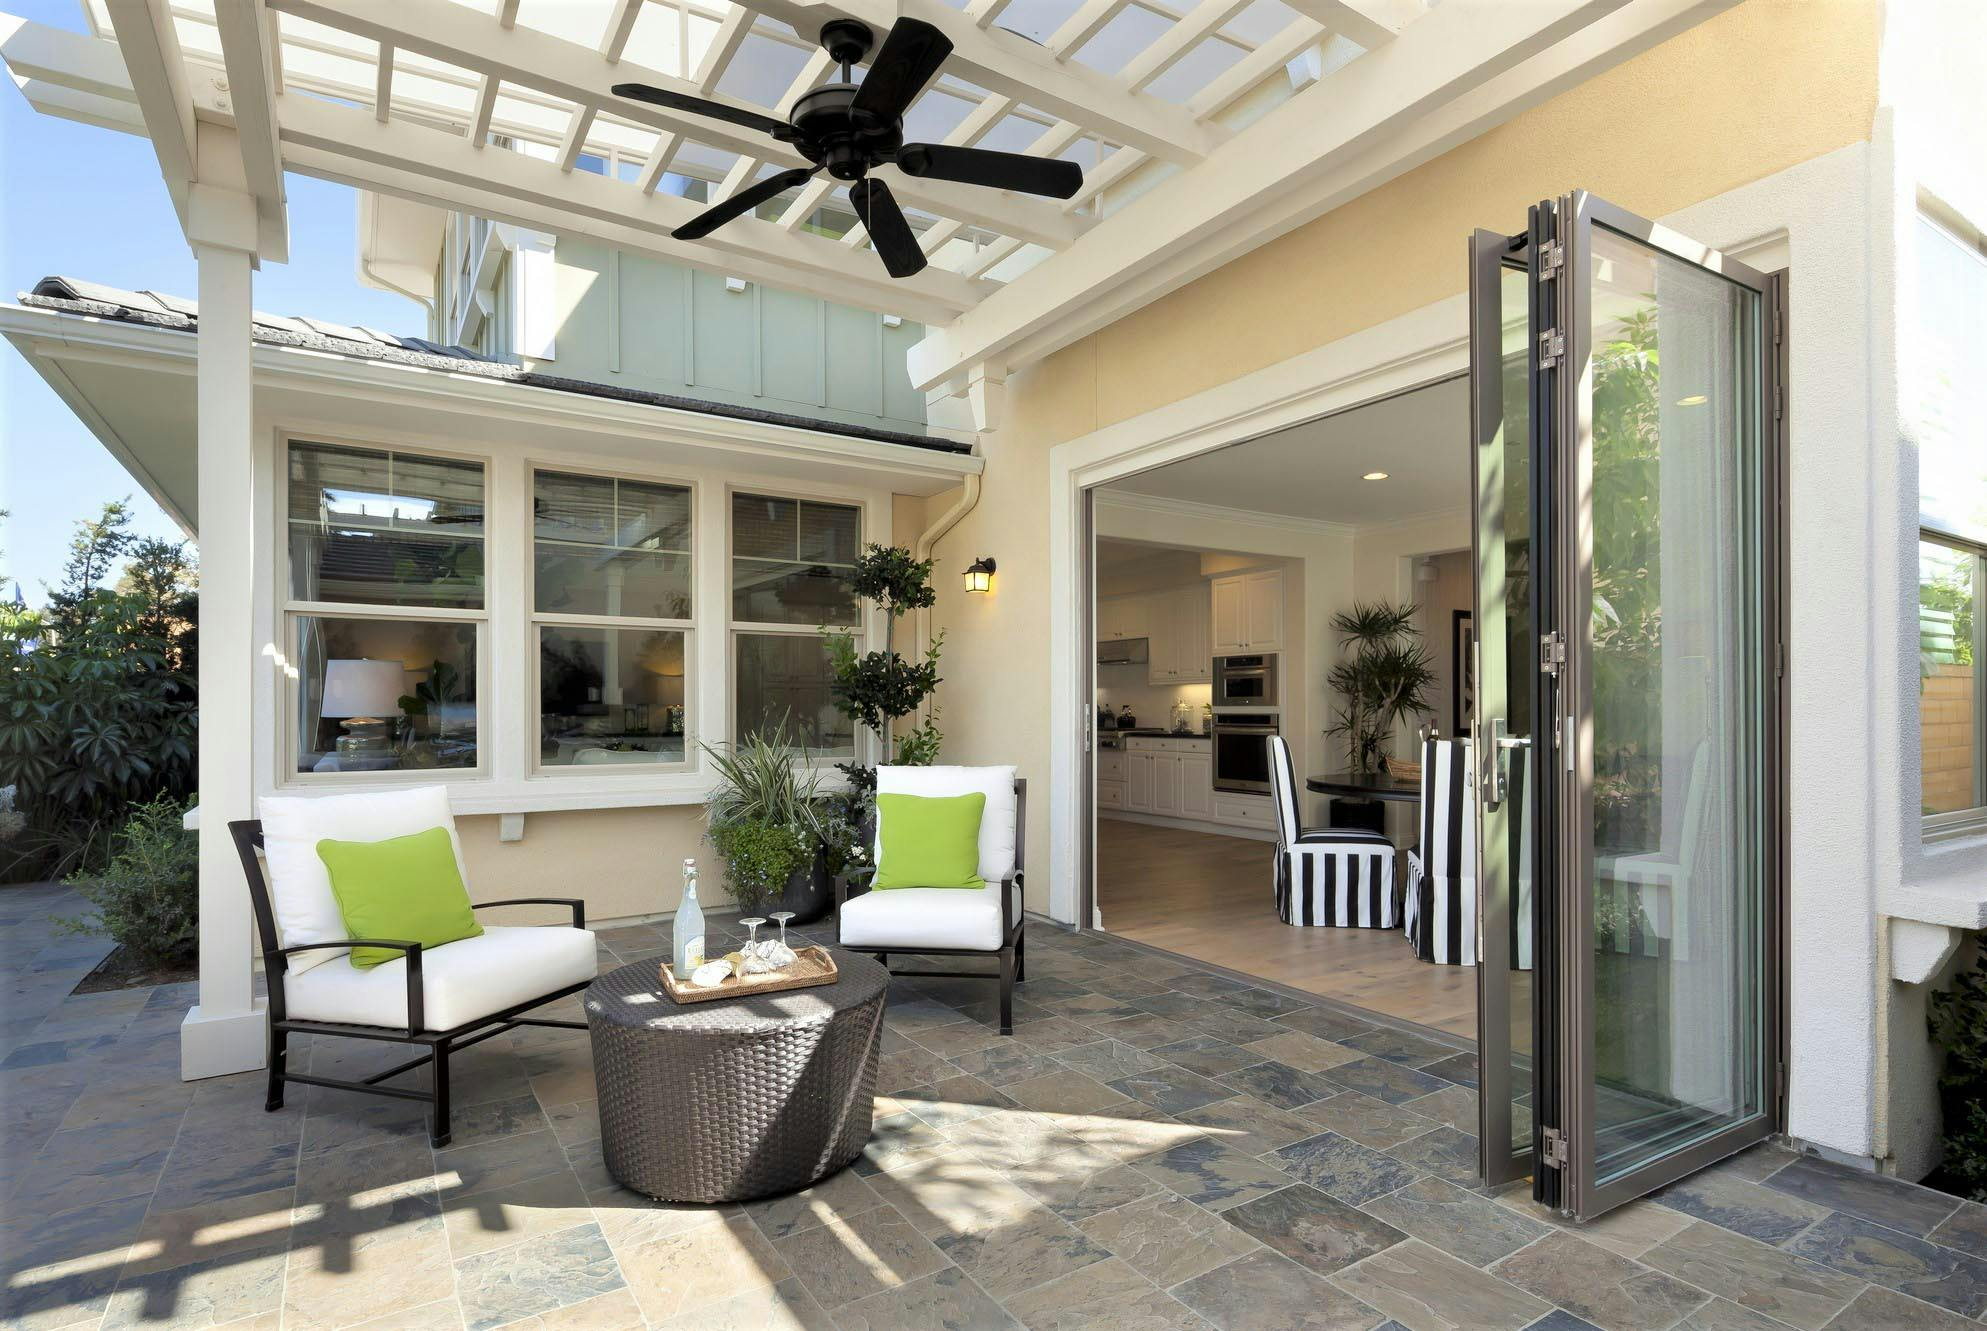 replacing traditional patio doors with folding glass walls